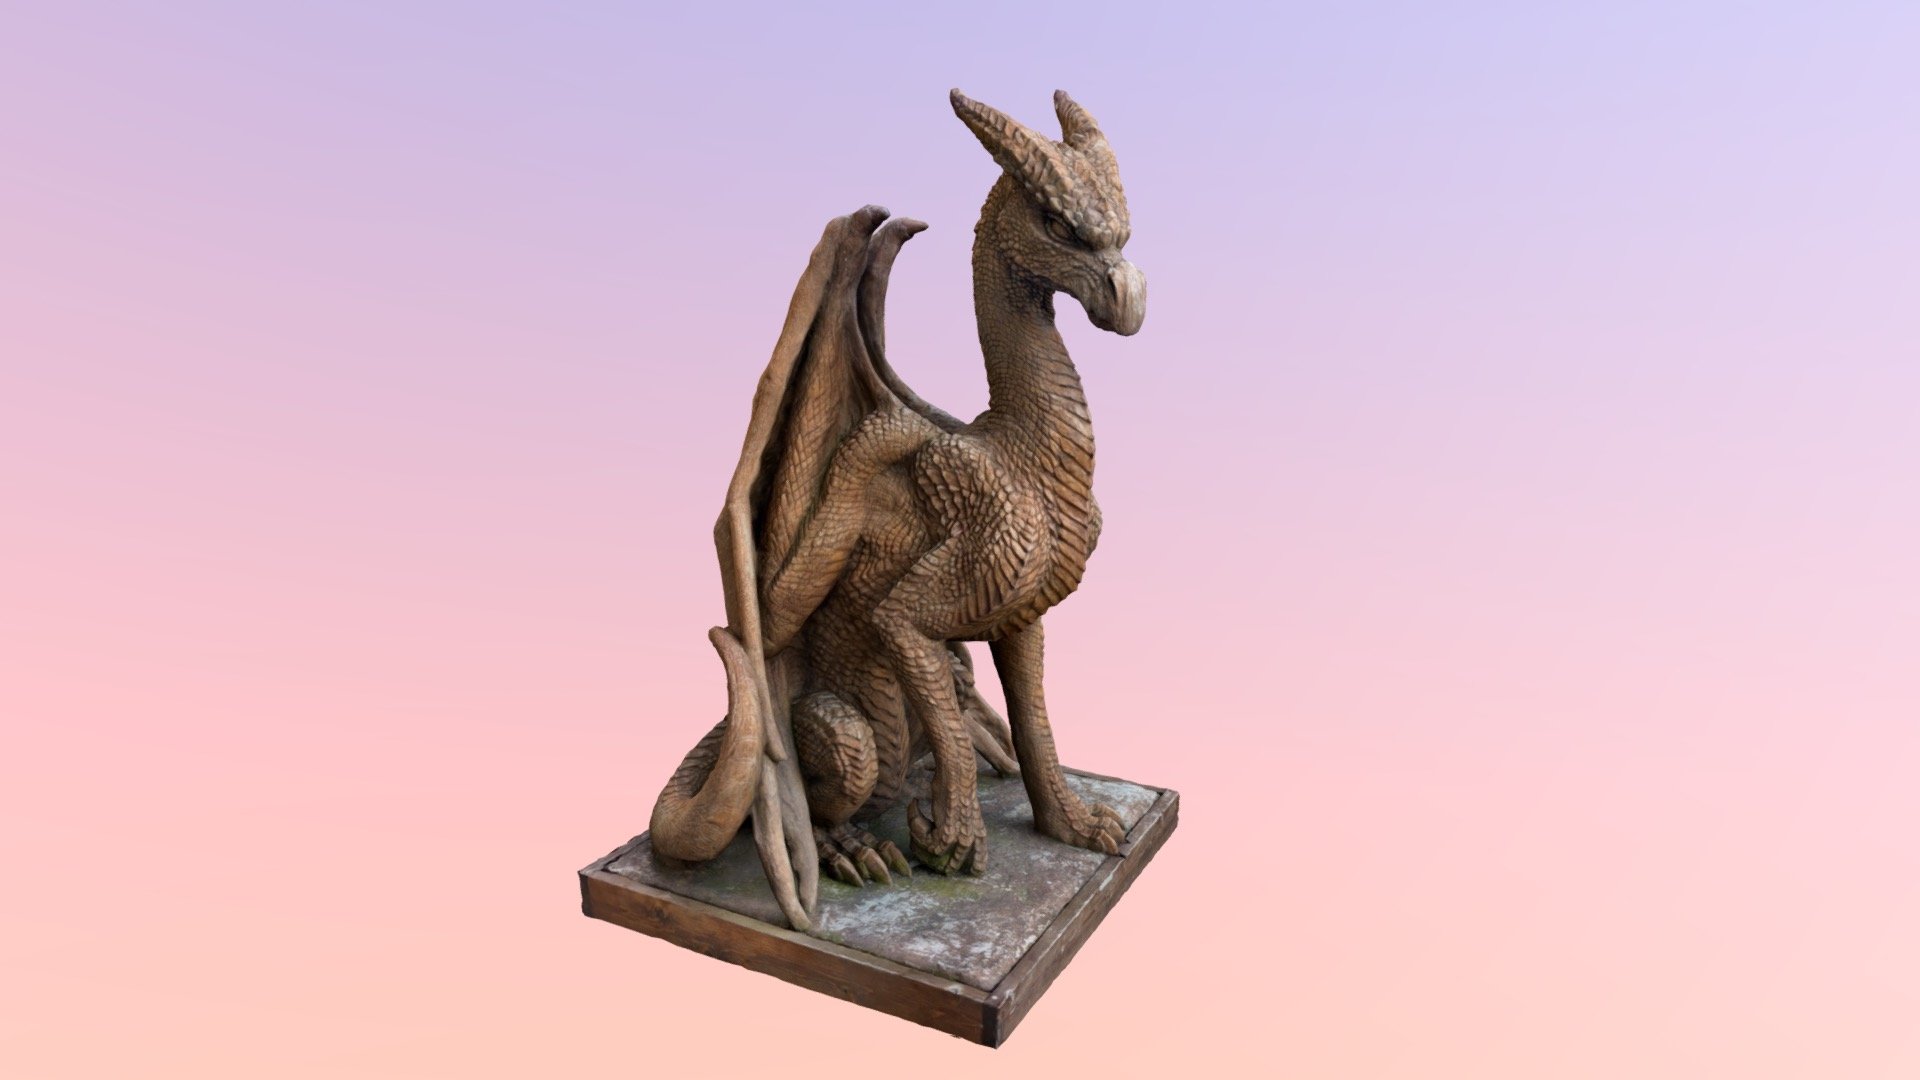 3D scan of a giant medieval dragon. By the look of the patina, its probably made in Iron. Captured near Lake Washington, Seattle

Created with Polycam - Medieval Metal Dragon - Buy Royalty Free 3D model by uttamg911 3d model